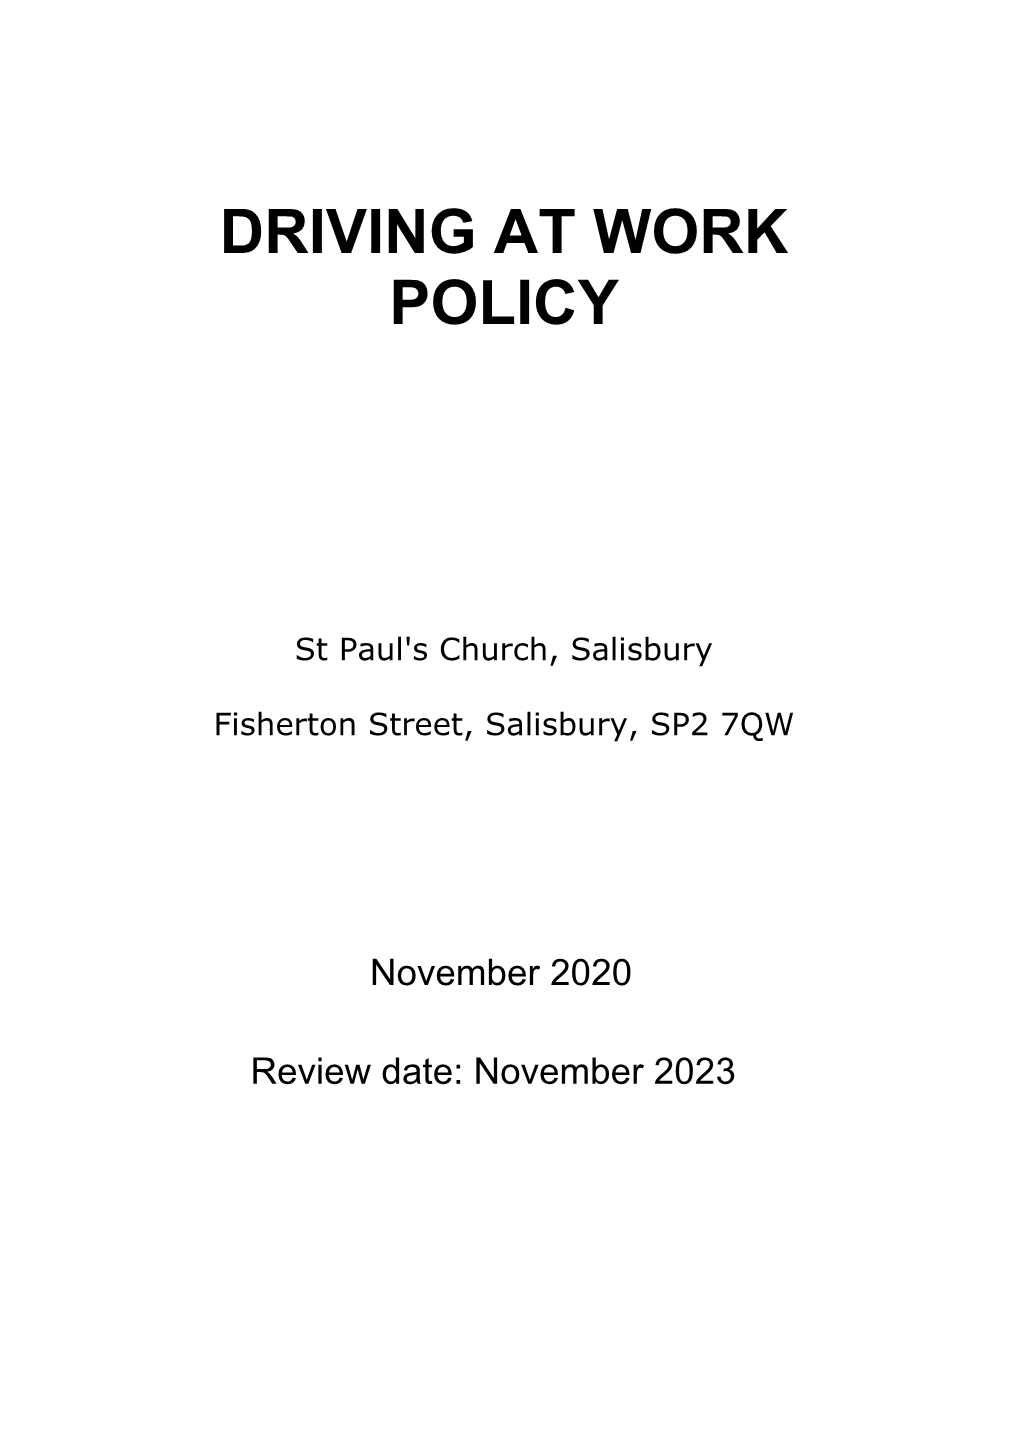 Driving at Work Policy